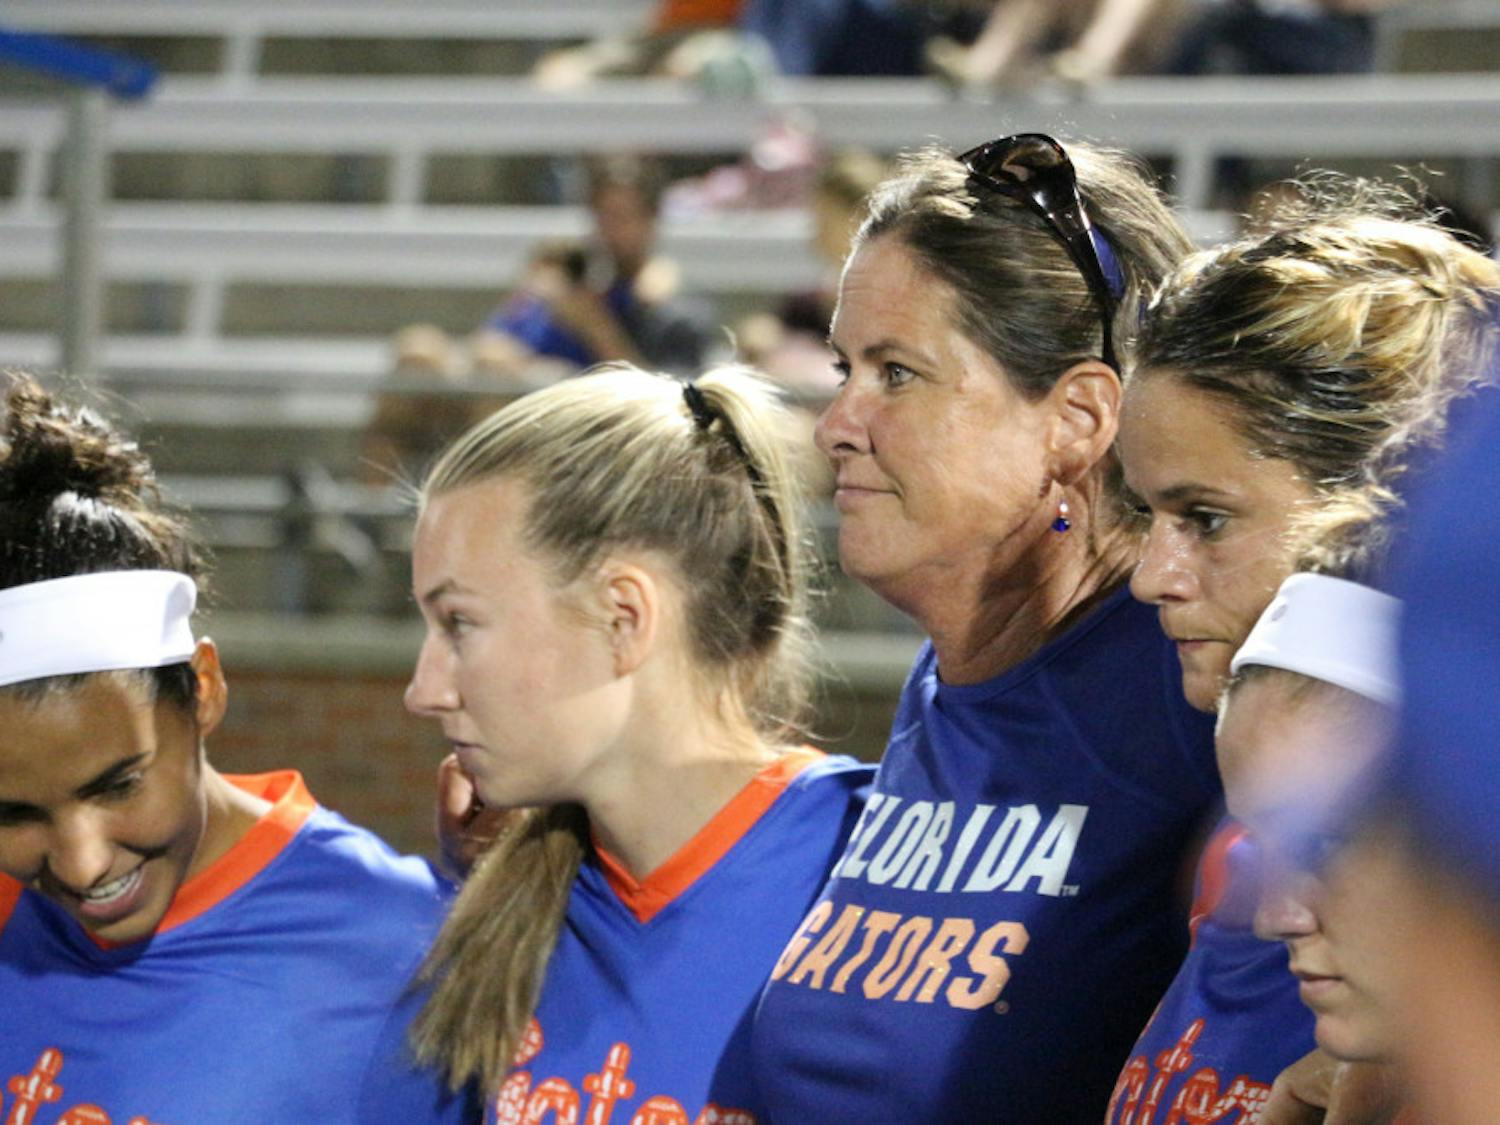 The Gators are going up against Washington tonight at 11 p.m. and will face Portland at 9 p.m. on Sunday.